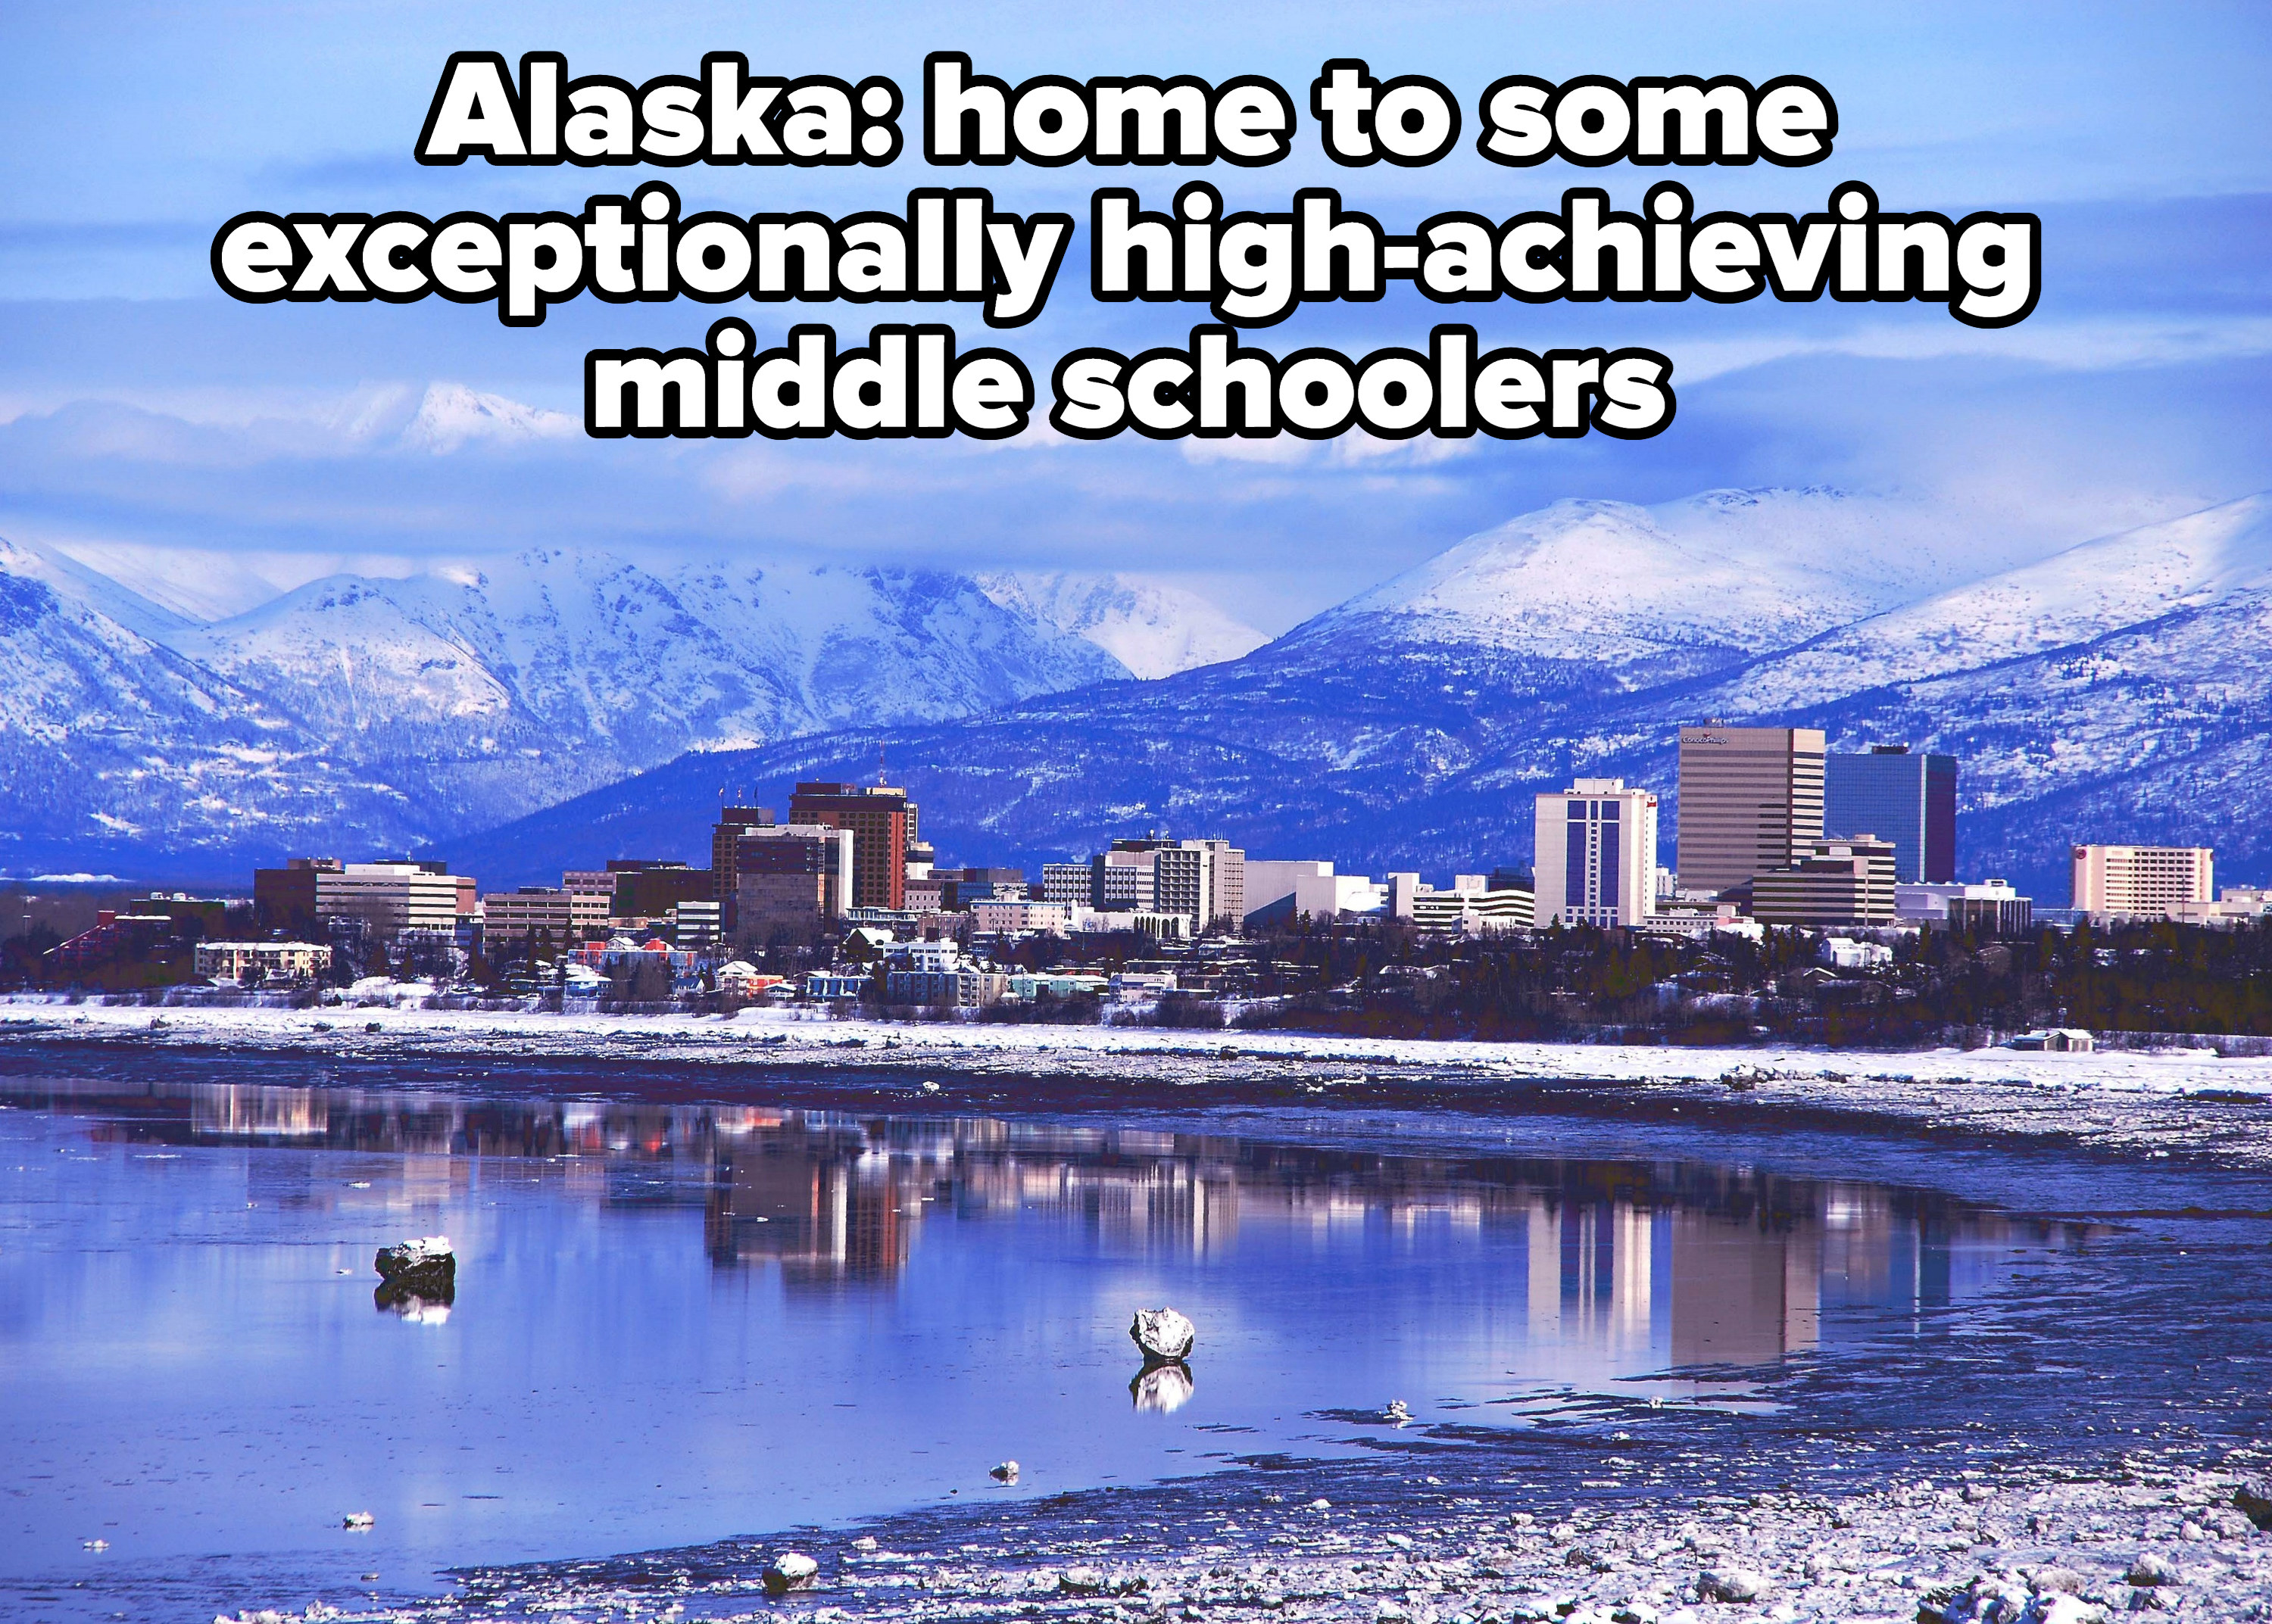 the downtown skyline of Anchorage, Alaska, with caption: Alaska: home to some exceptionally high-achieving middle schoolers